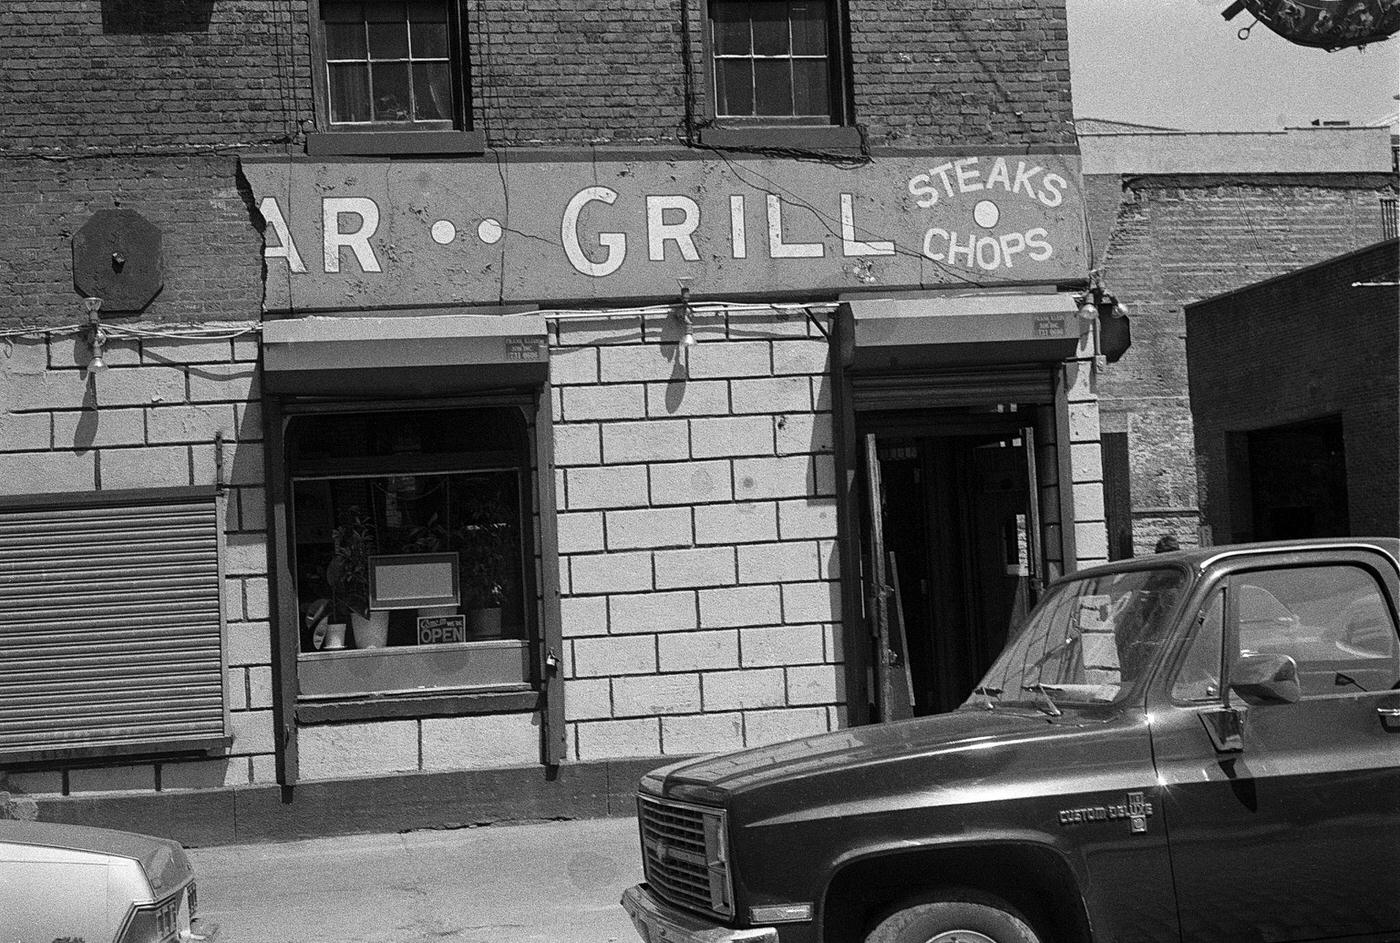 Sign For Old Bar And Grill Offering Steaks And Chops At 2 South Street, Manhattan, 1990